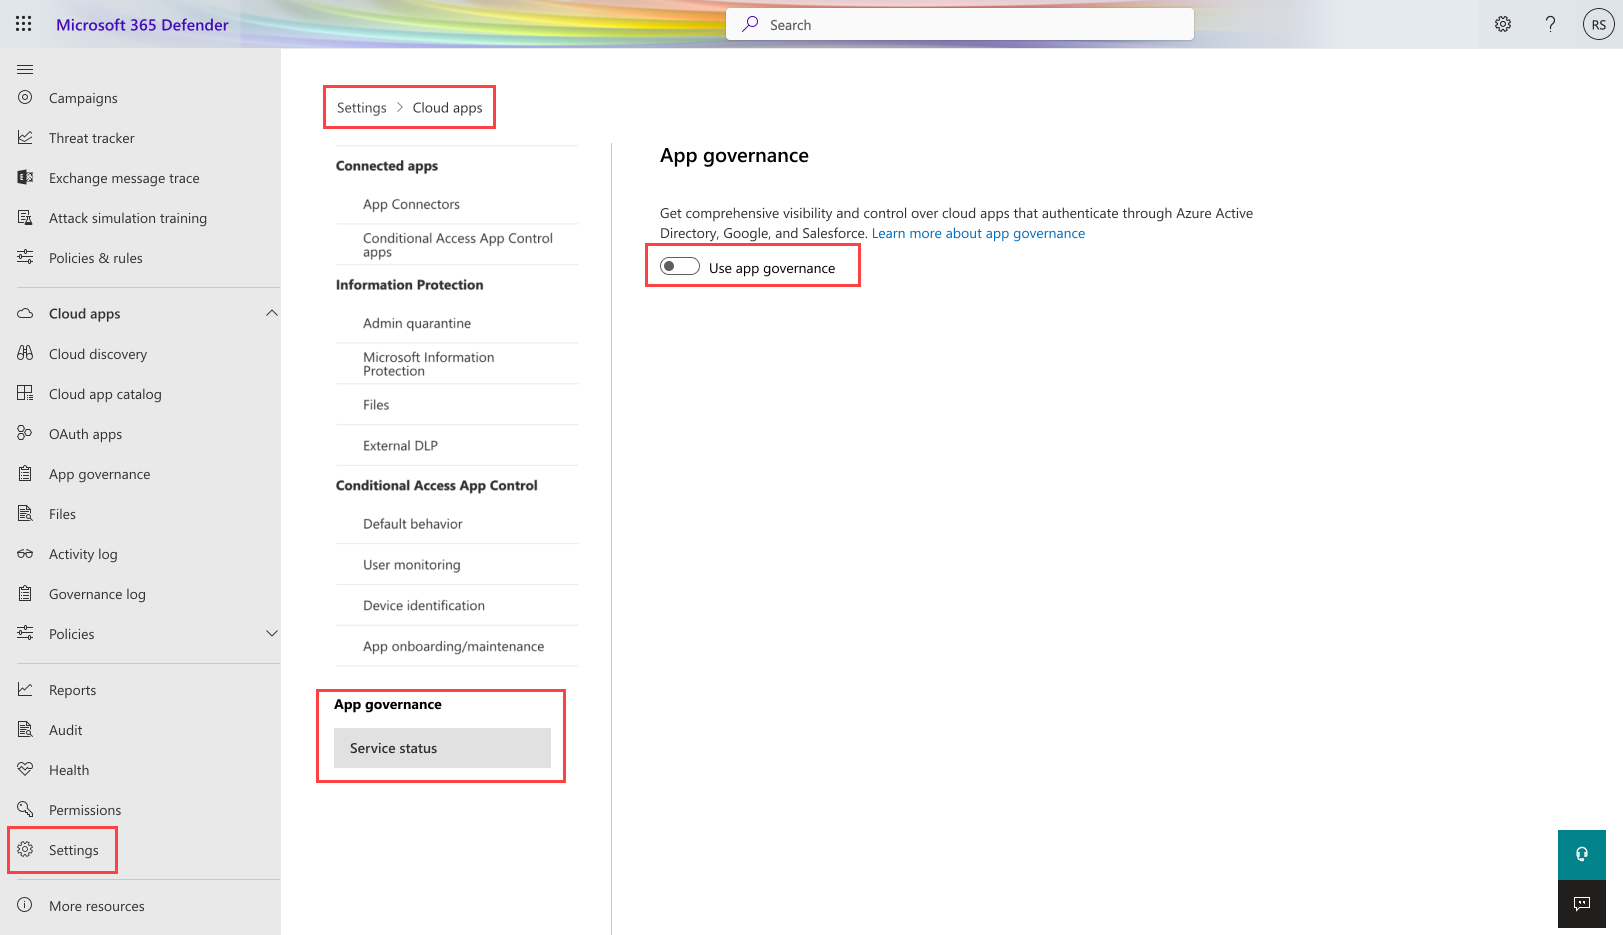 Screenshot of the App governance toggle in Microsoft Defender XDR.